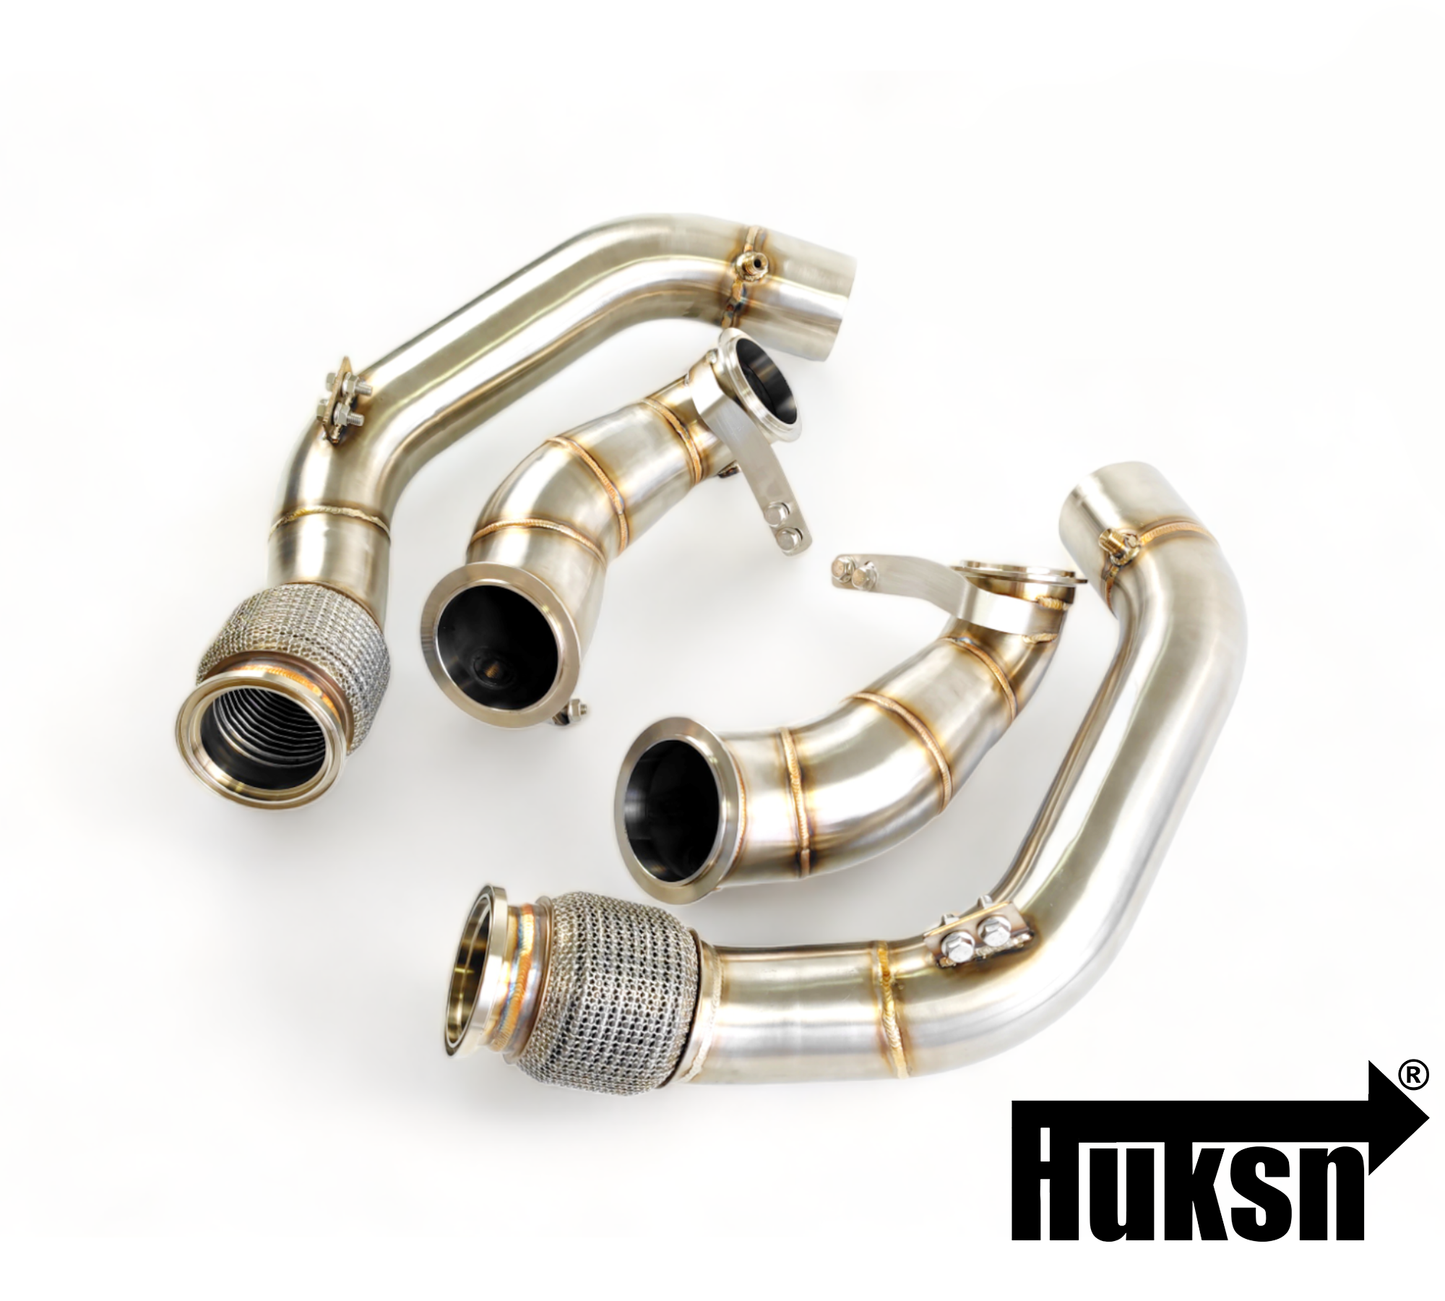 Primary and Secondary Downpipes F90 M5 / F9X M8 S63TU4